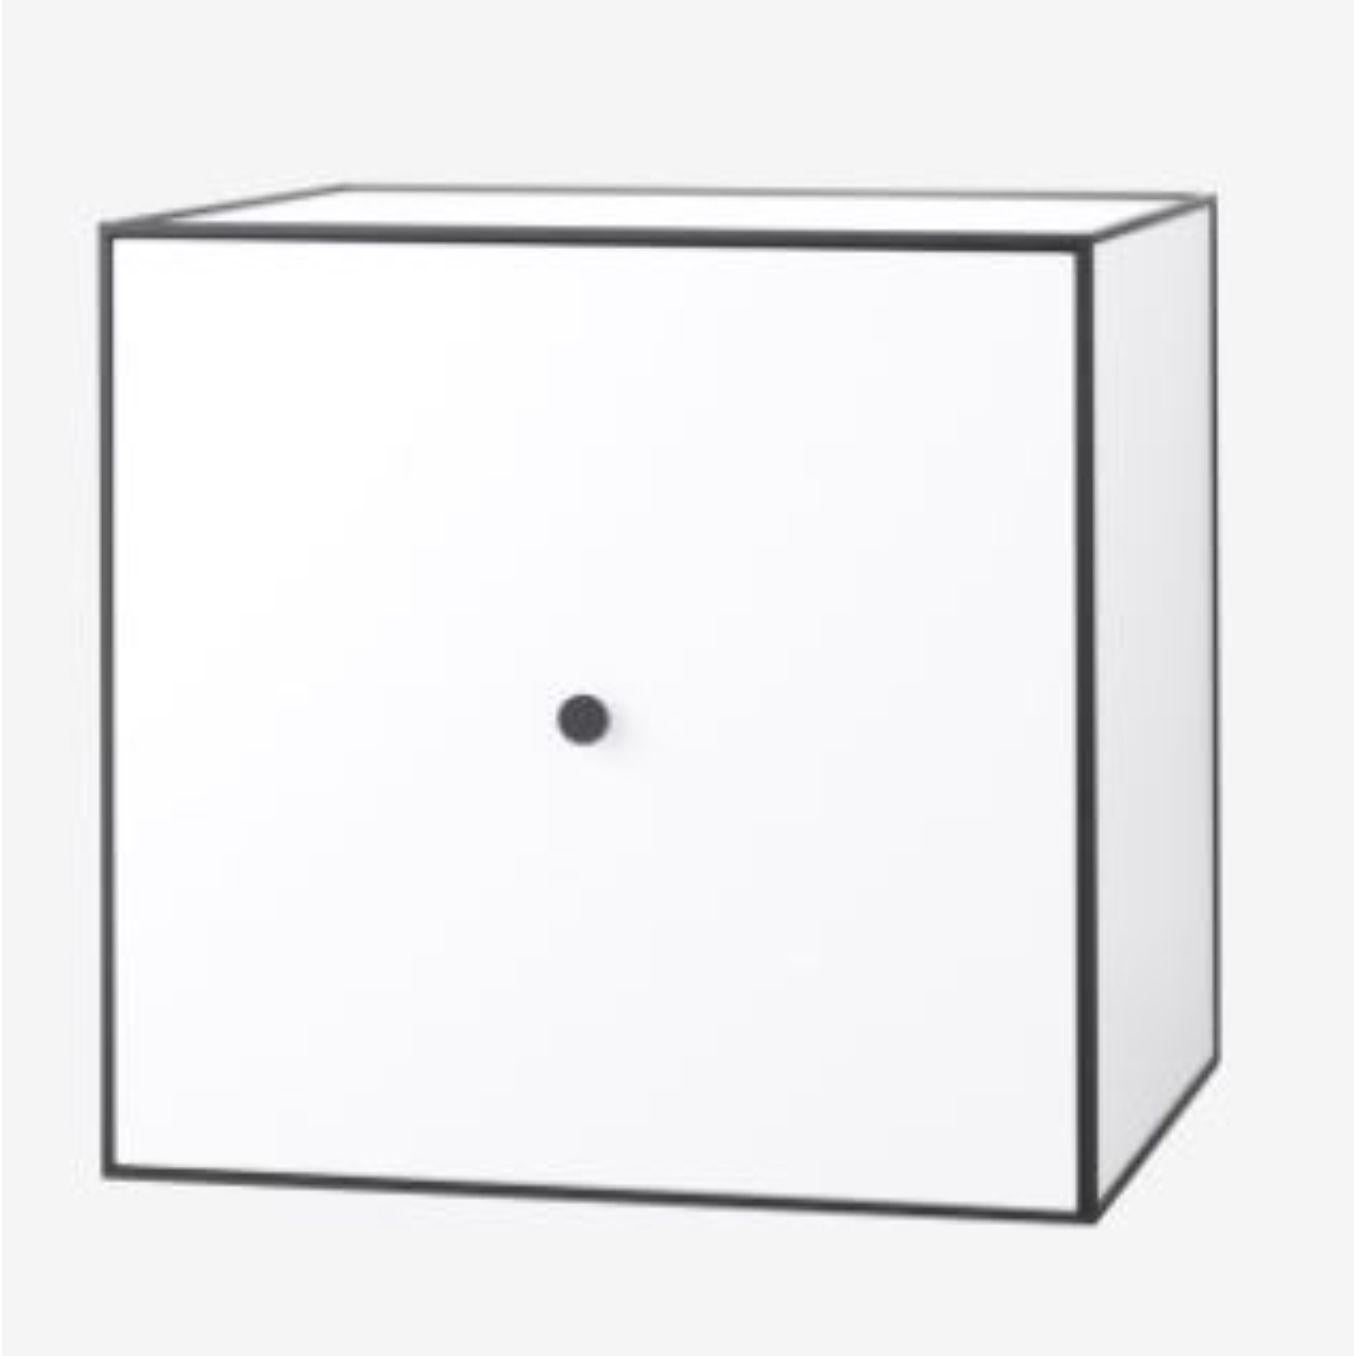 49 white frame box with door / shelf by Lassen.
Dimensions: D 49 x W 42 x H 49 cm.
Materials: Finér, Melamin, Melamin, Melamine, Metal, Veneer
Also available in different colors and dimensions. 
Weight: 17 Kg


By Lassen is a Danish design